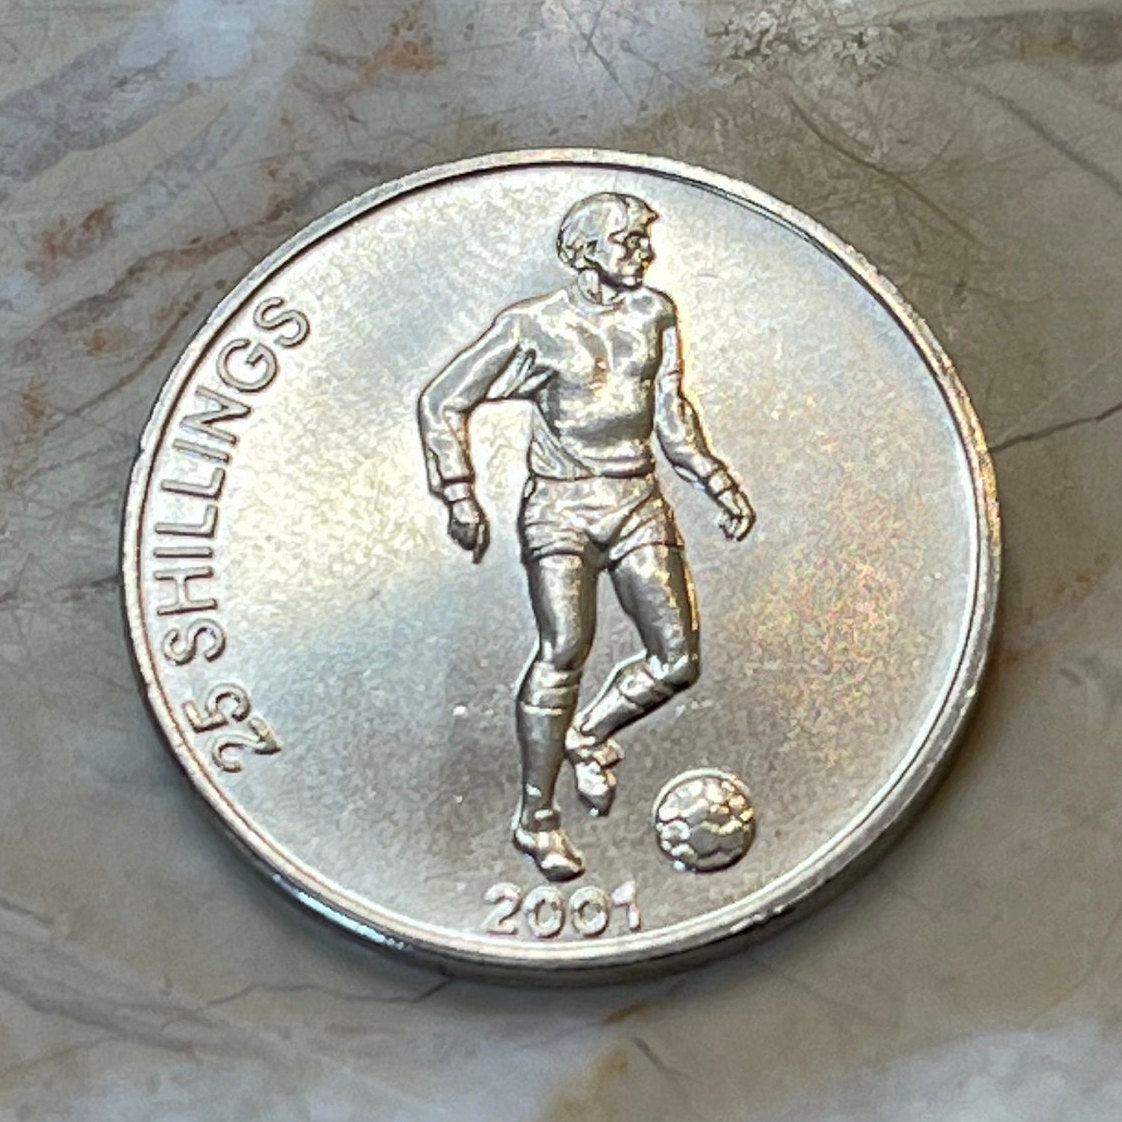 Soccer 25 Shillings Somalia Authentic Coin Money for Jewelry and Craft Making (Ocean Stars Football Team)